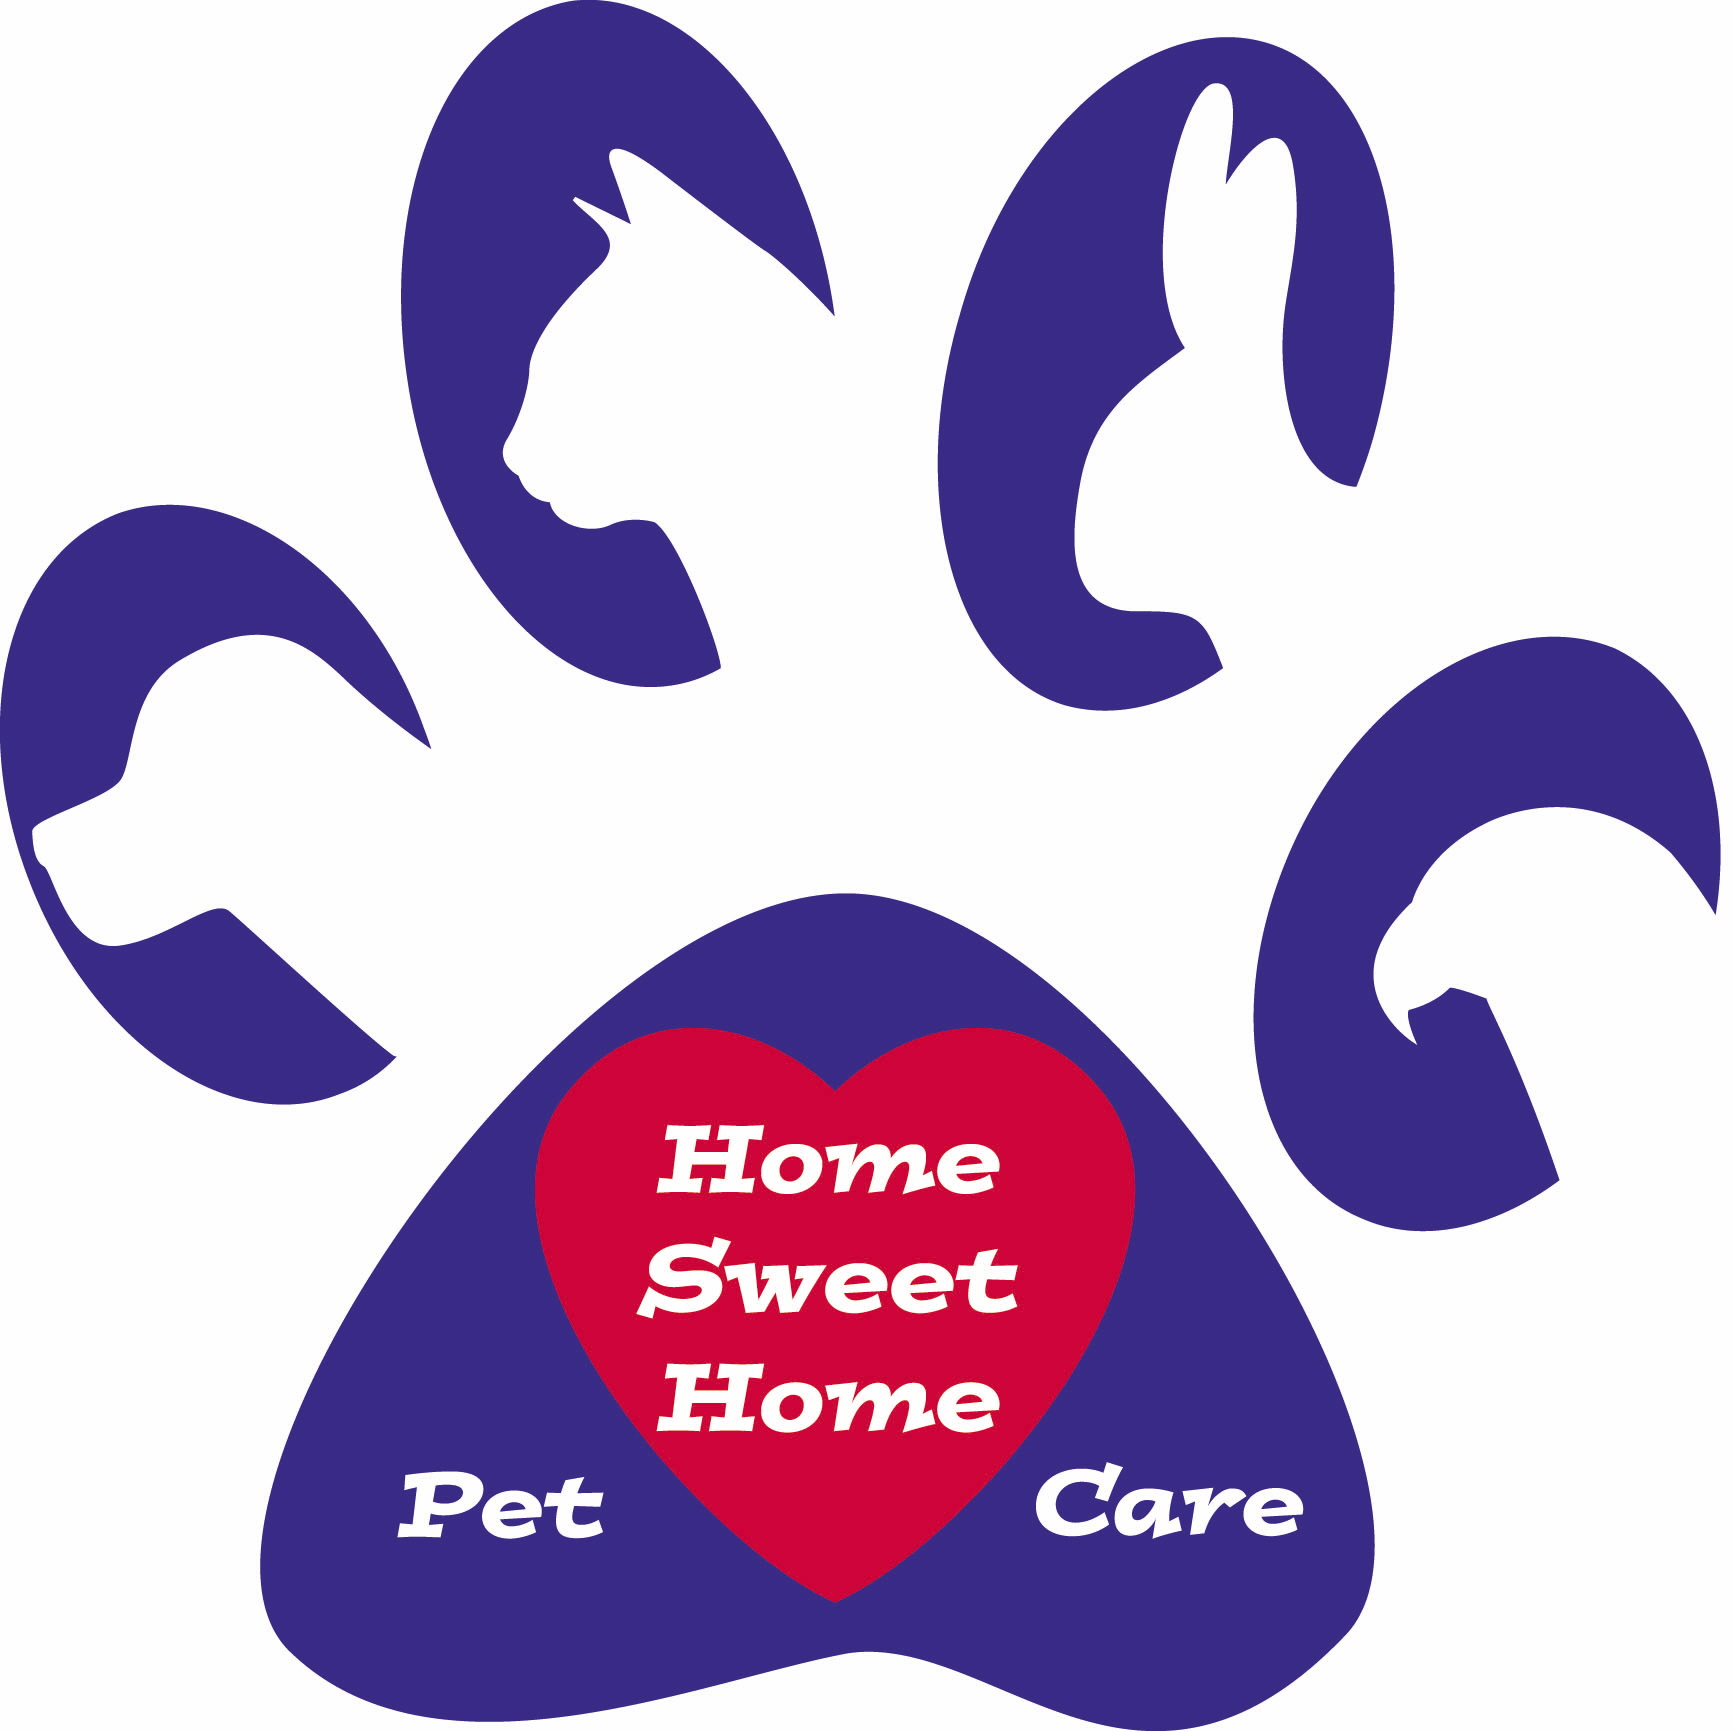 Home Sweet Home Logo   Clipart Panda   Free Clipart Images